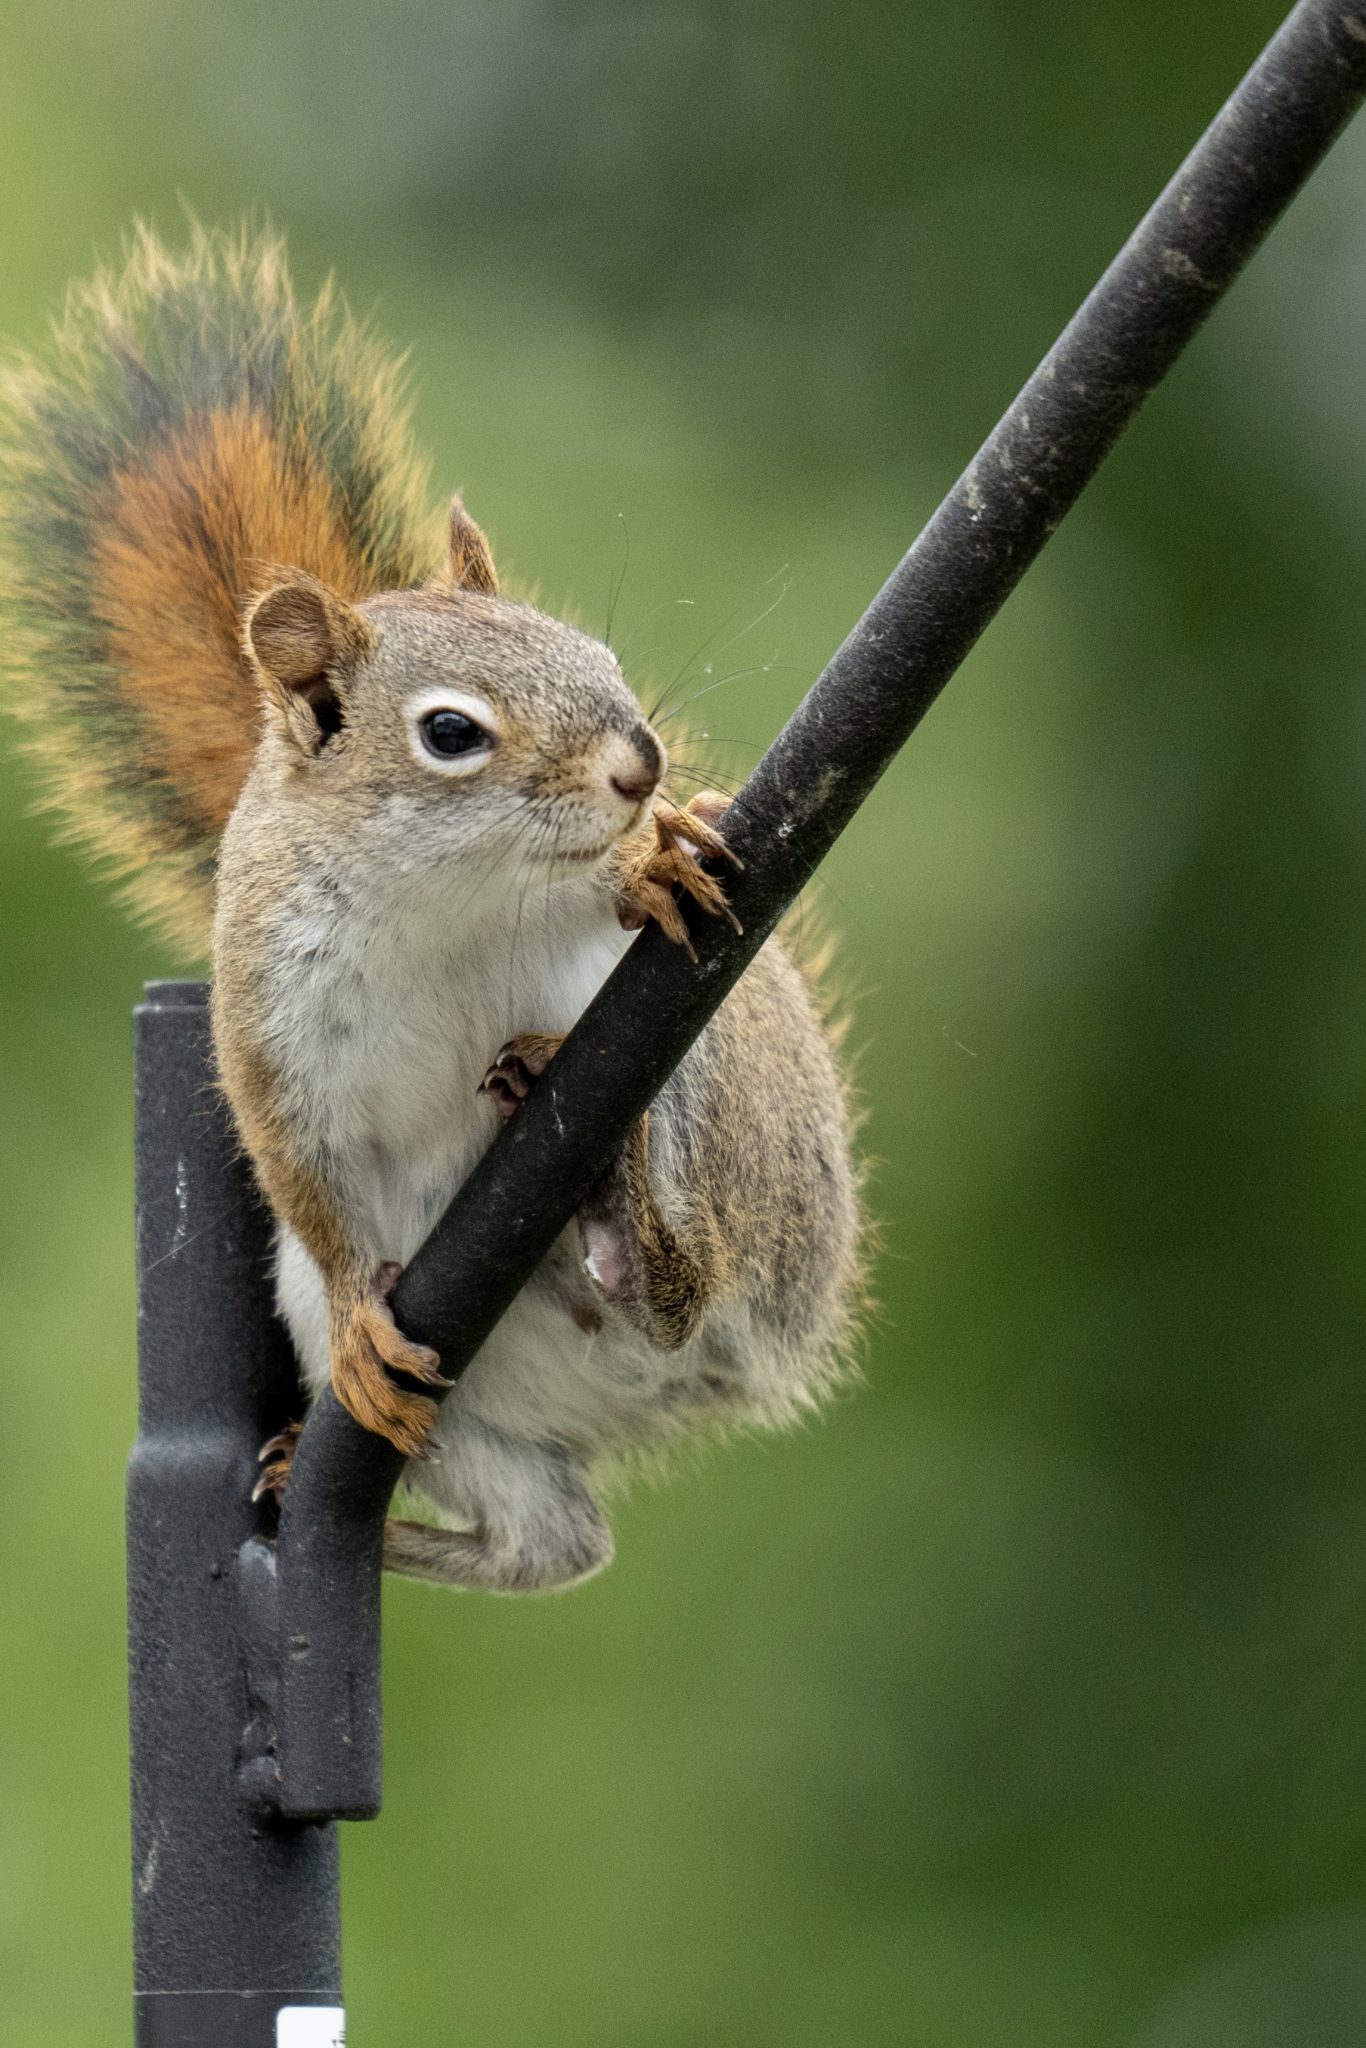 Juvenile American Red Squirrel sitting on top of a pole